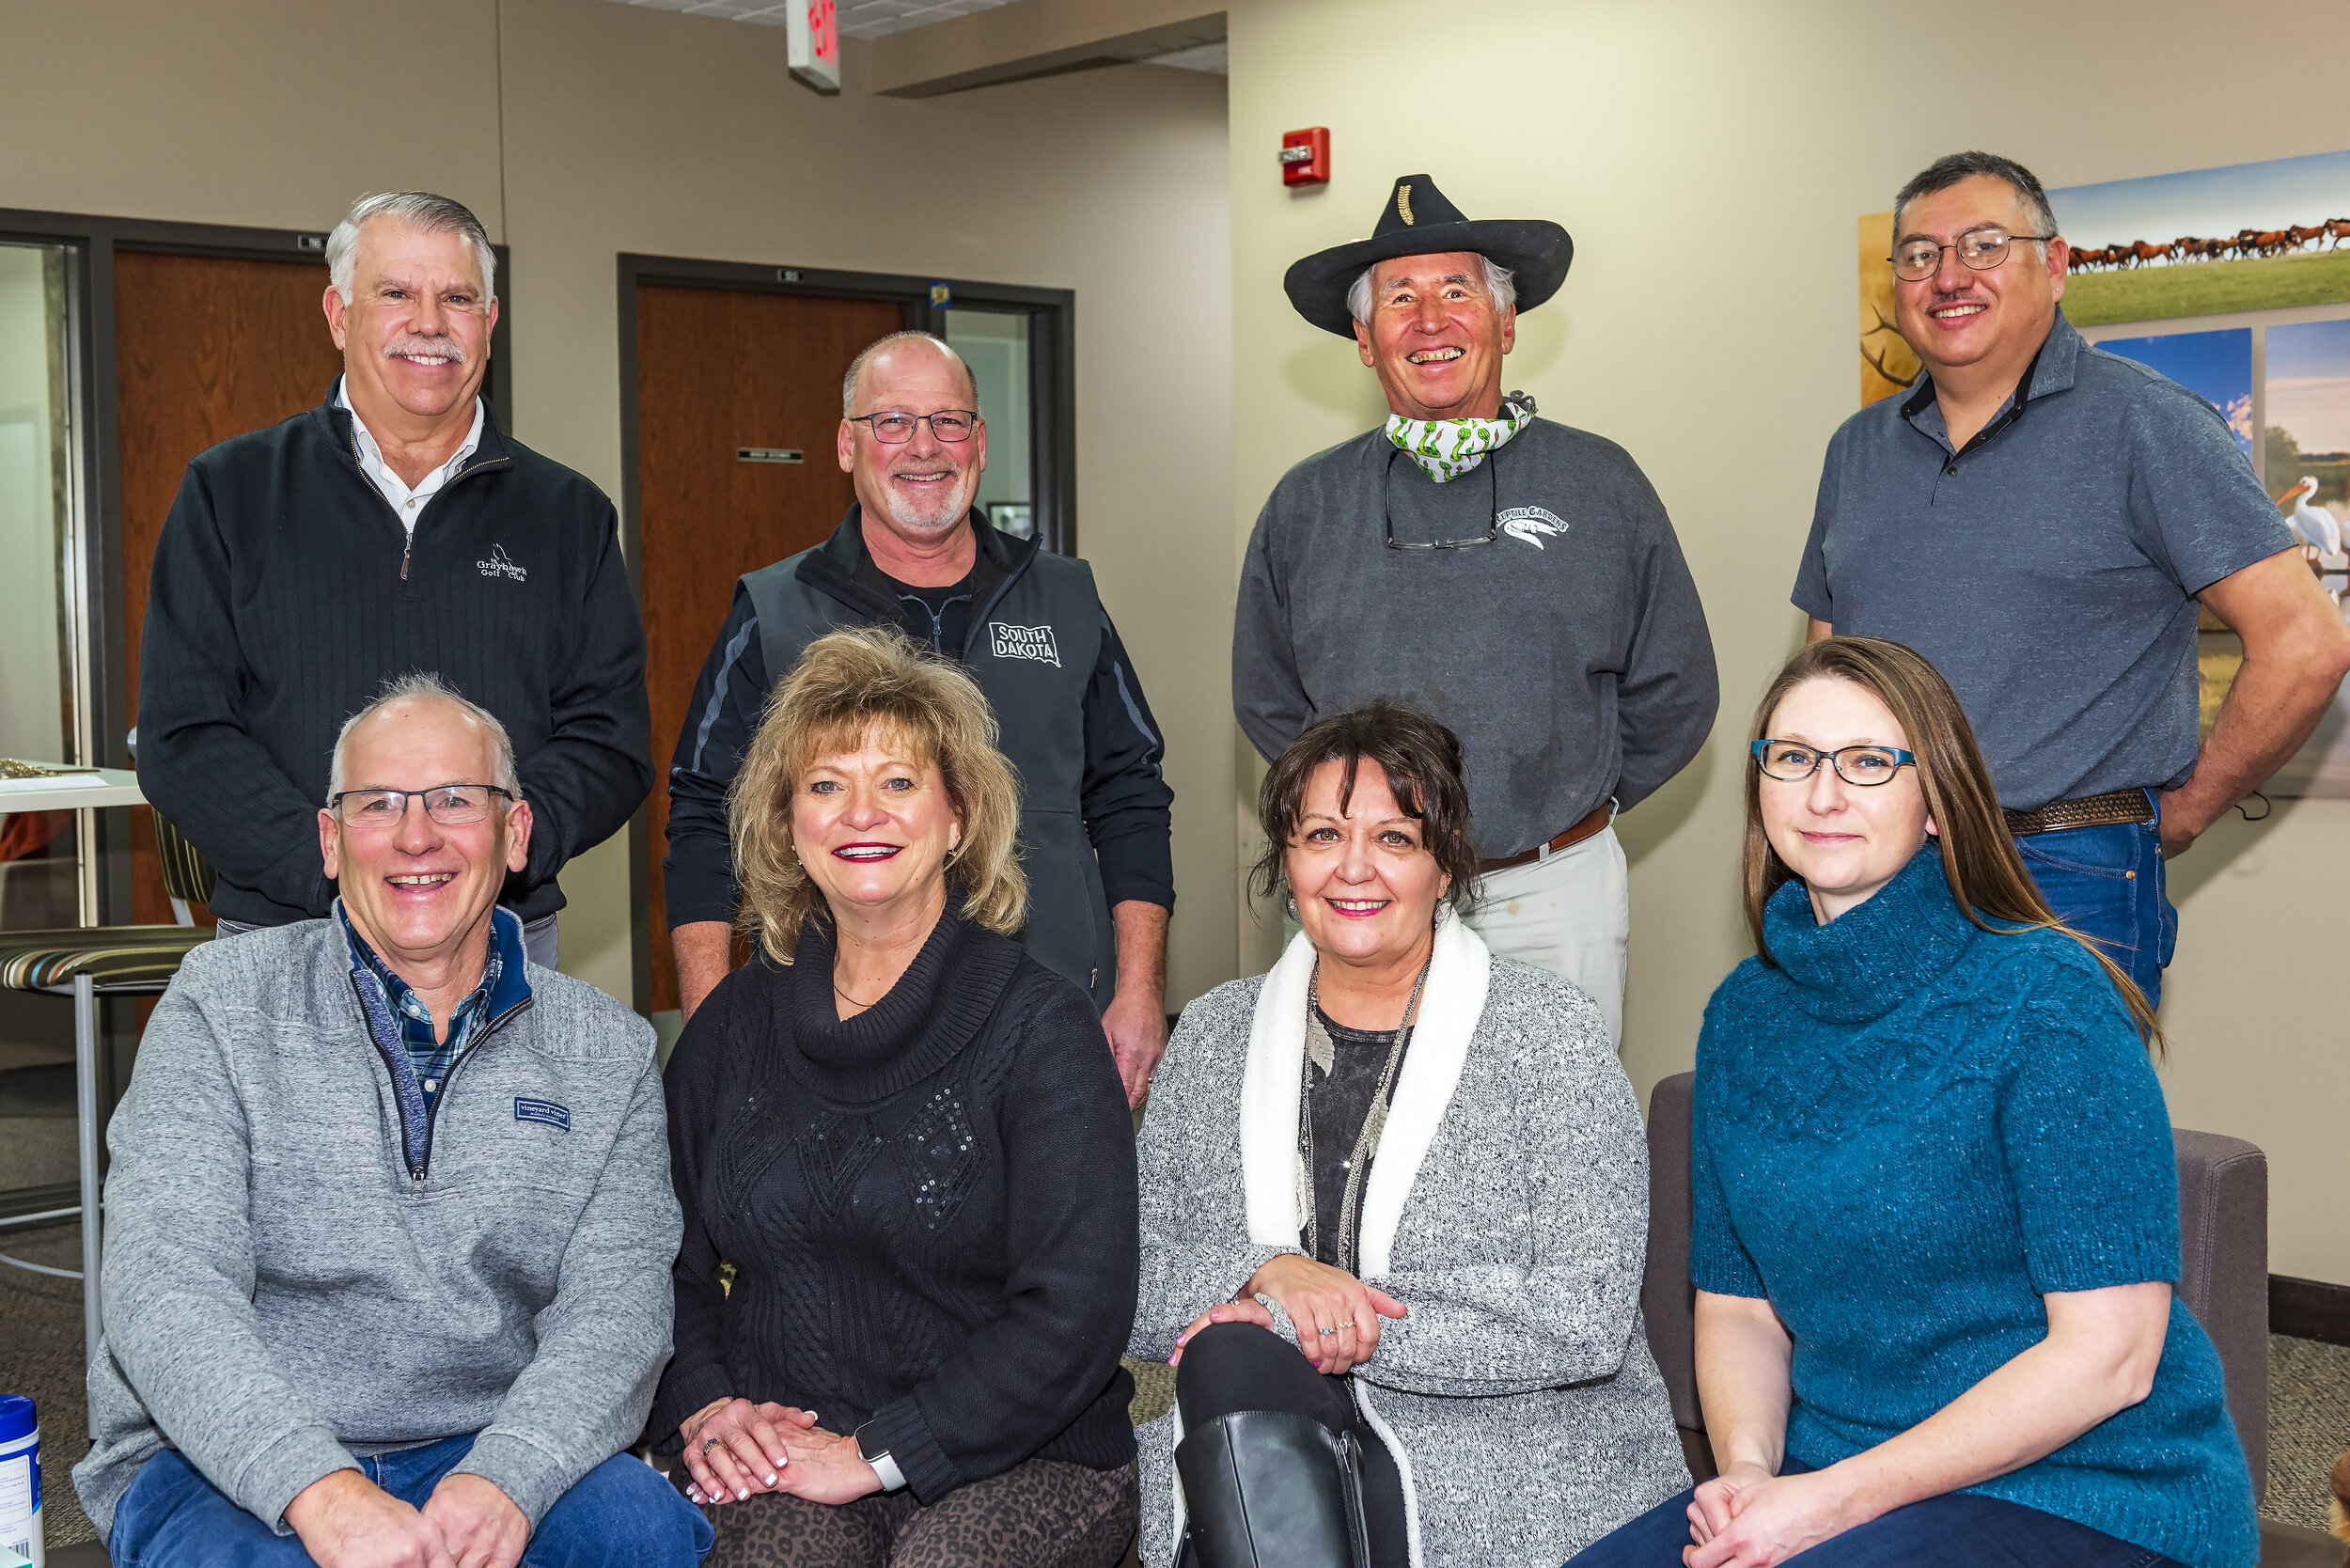 Photo of board: Front row left to right: Frank Smith, Gettysburg; Kristi Wagner, Whitewood; Carmen Schramm, Yankton; Ann Lesch, De Smet. Back row left to right: Tom Biegler, Sioux Falls; Val Rausch, Big Stone City; John Brockelsby, Rapid City; Ivan …